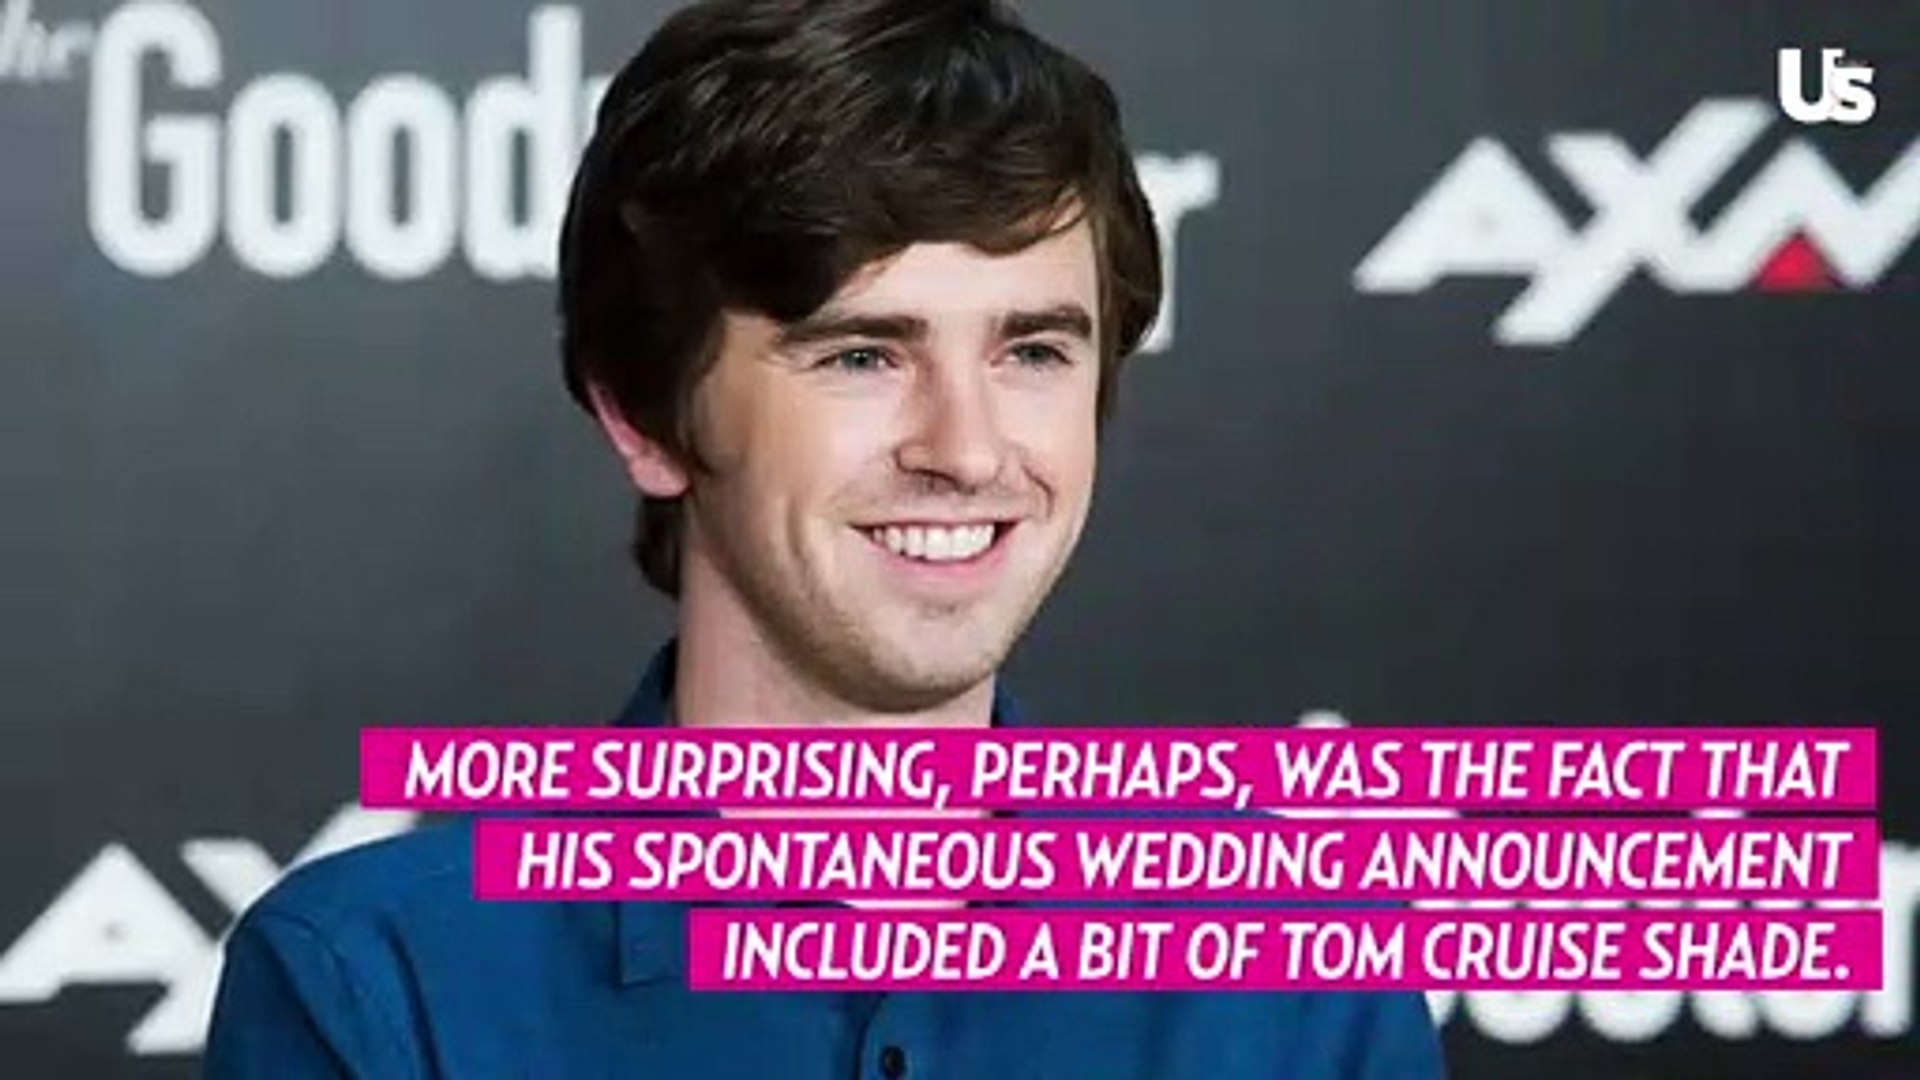 Freddie Highmore Confirms He's Married by Throwing Tom Cruise Shade - video  Dailymotion